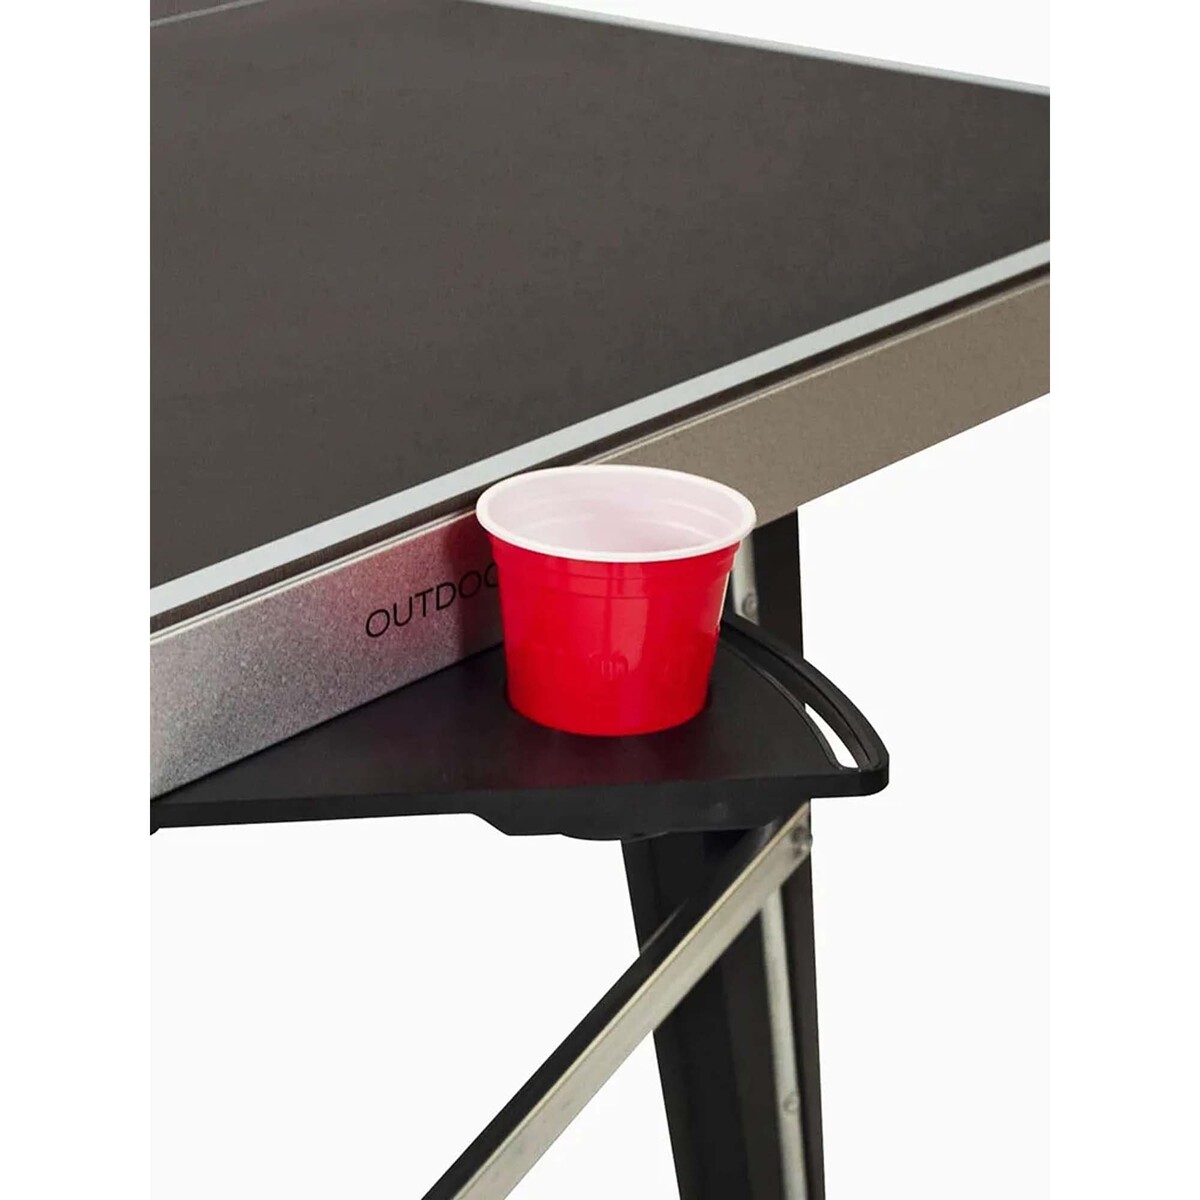 Cornilleau 600 X Performance Outdoor Table Tennis Table, Black, 34016